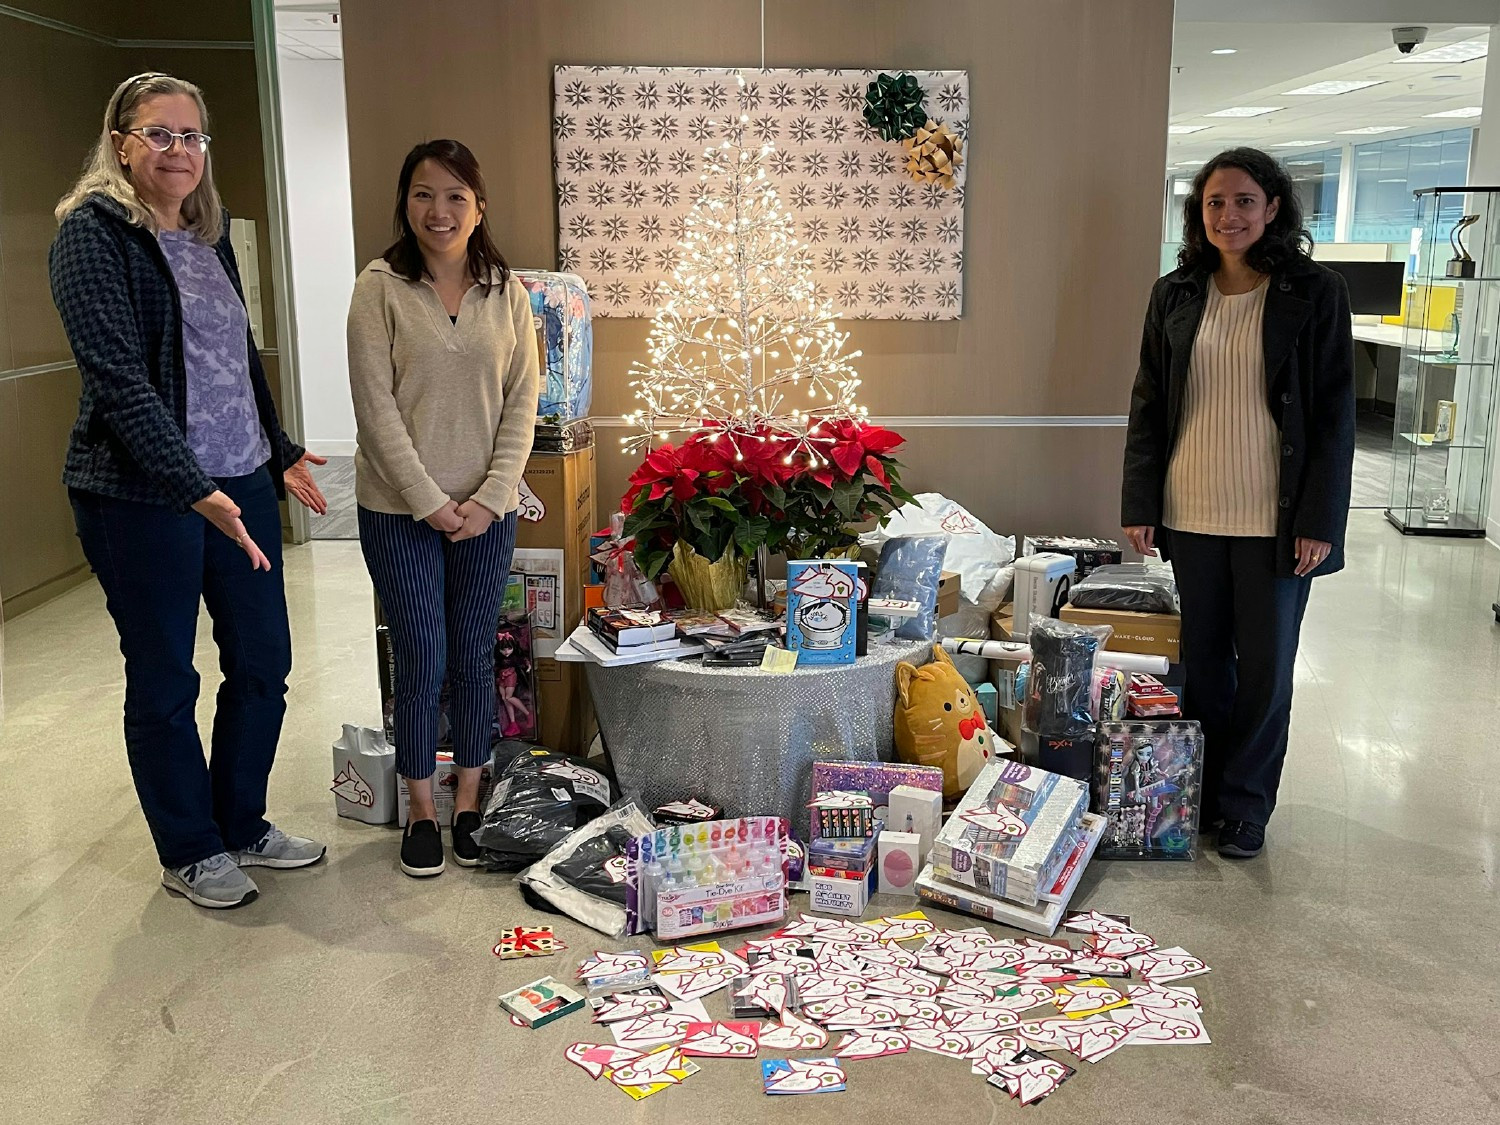 Collection of holiday gifts for Casa Pacifica's Make a Wish Come True event for children in need
